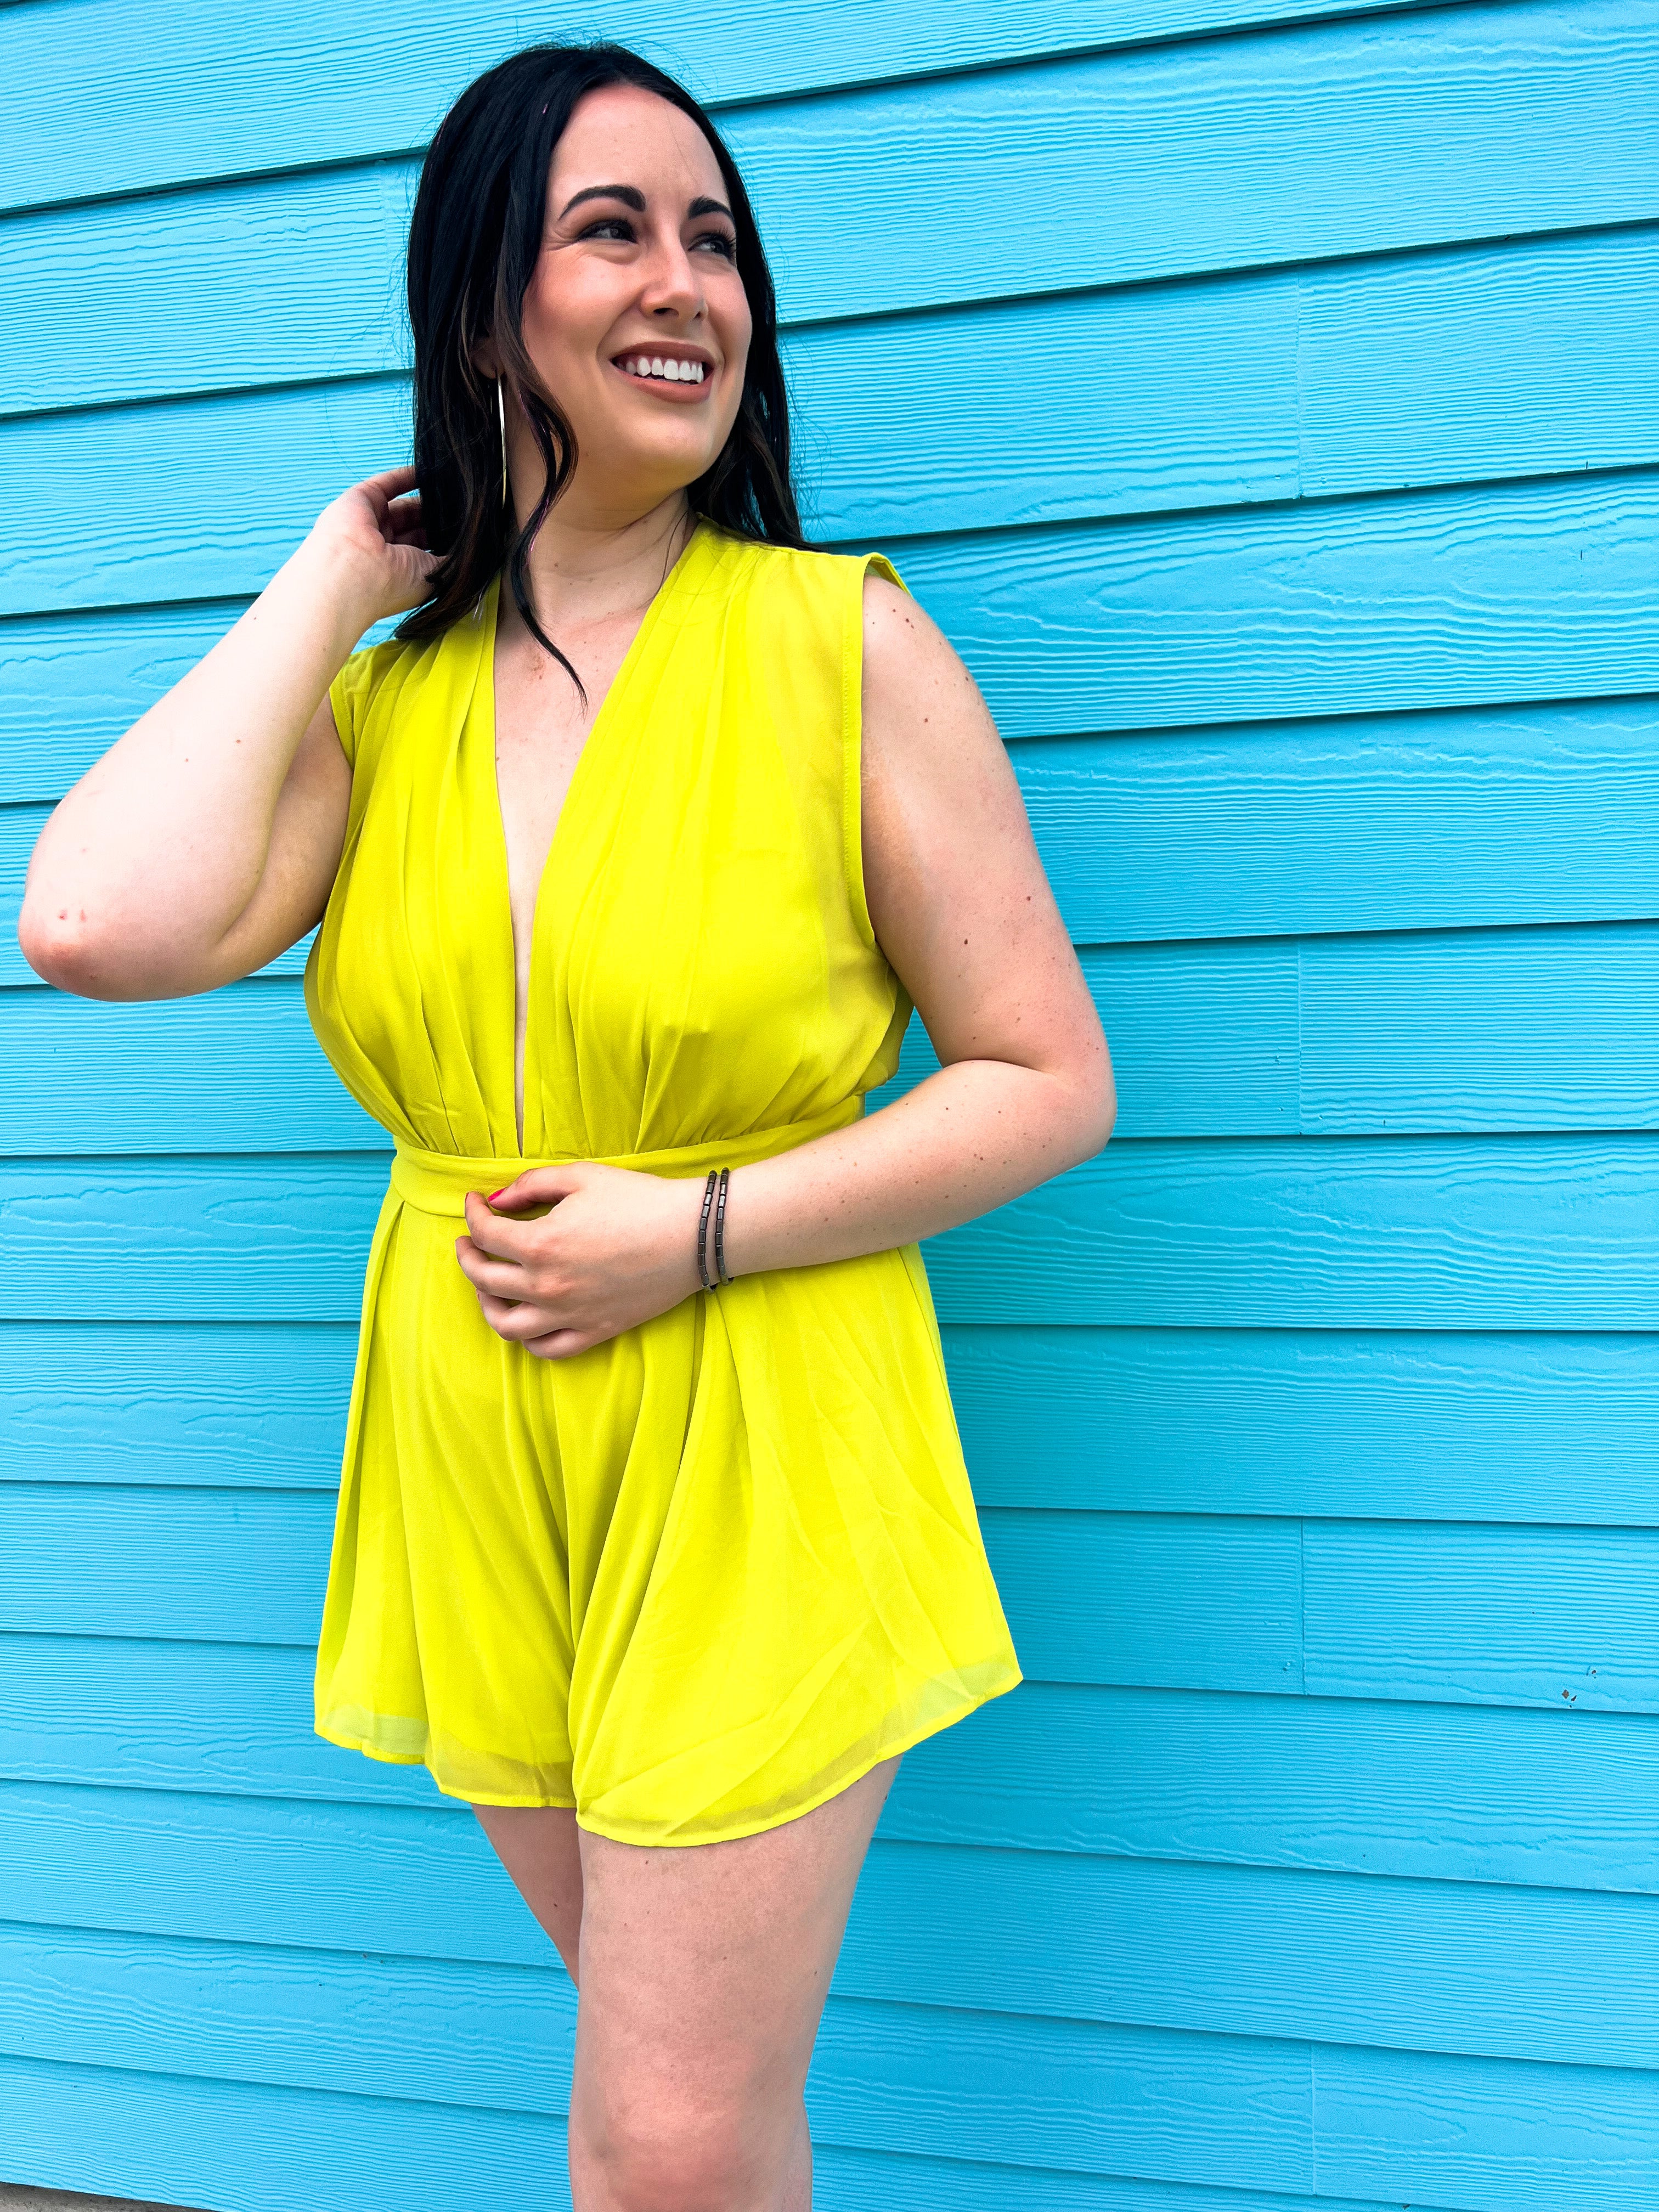 Neon Lime Plunging Romper